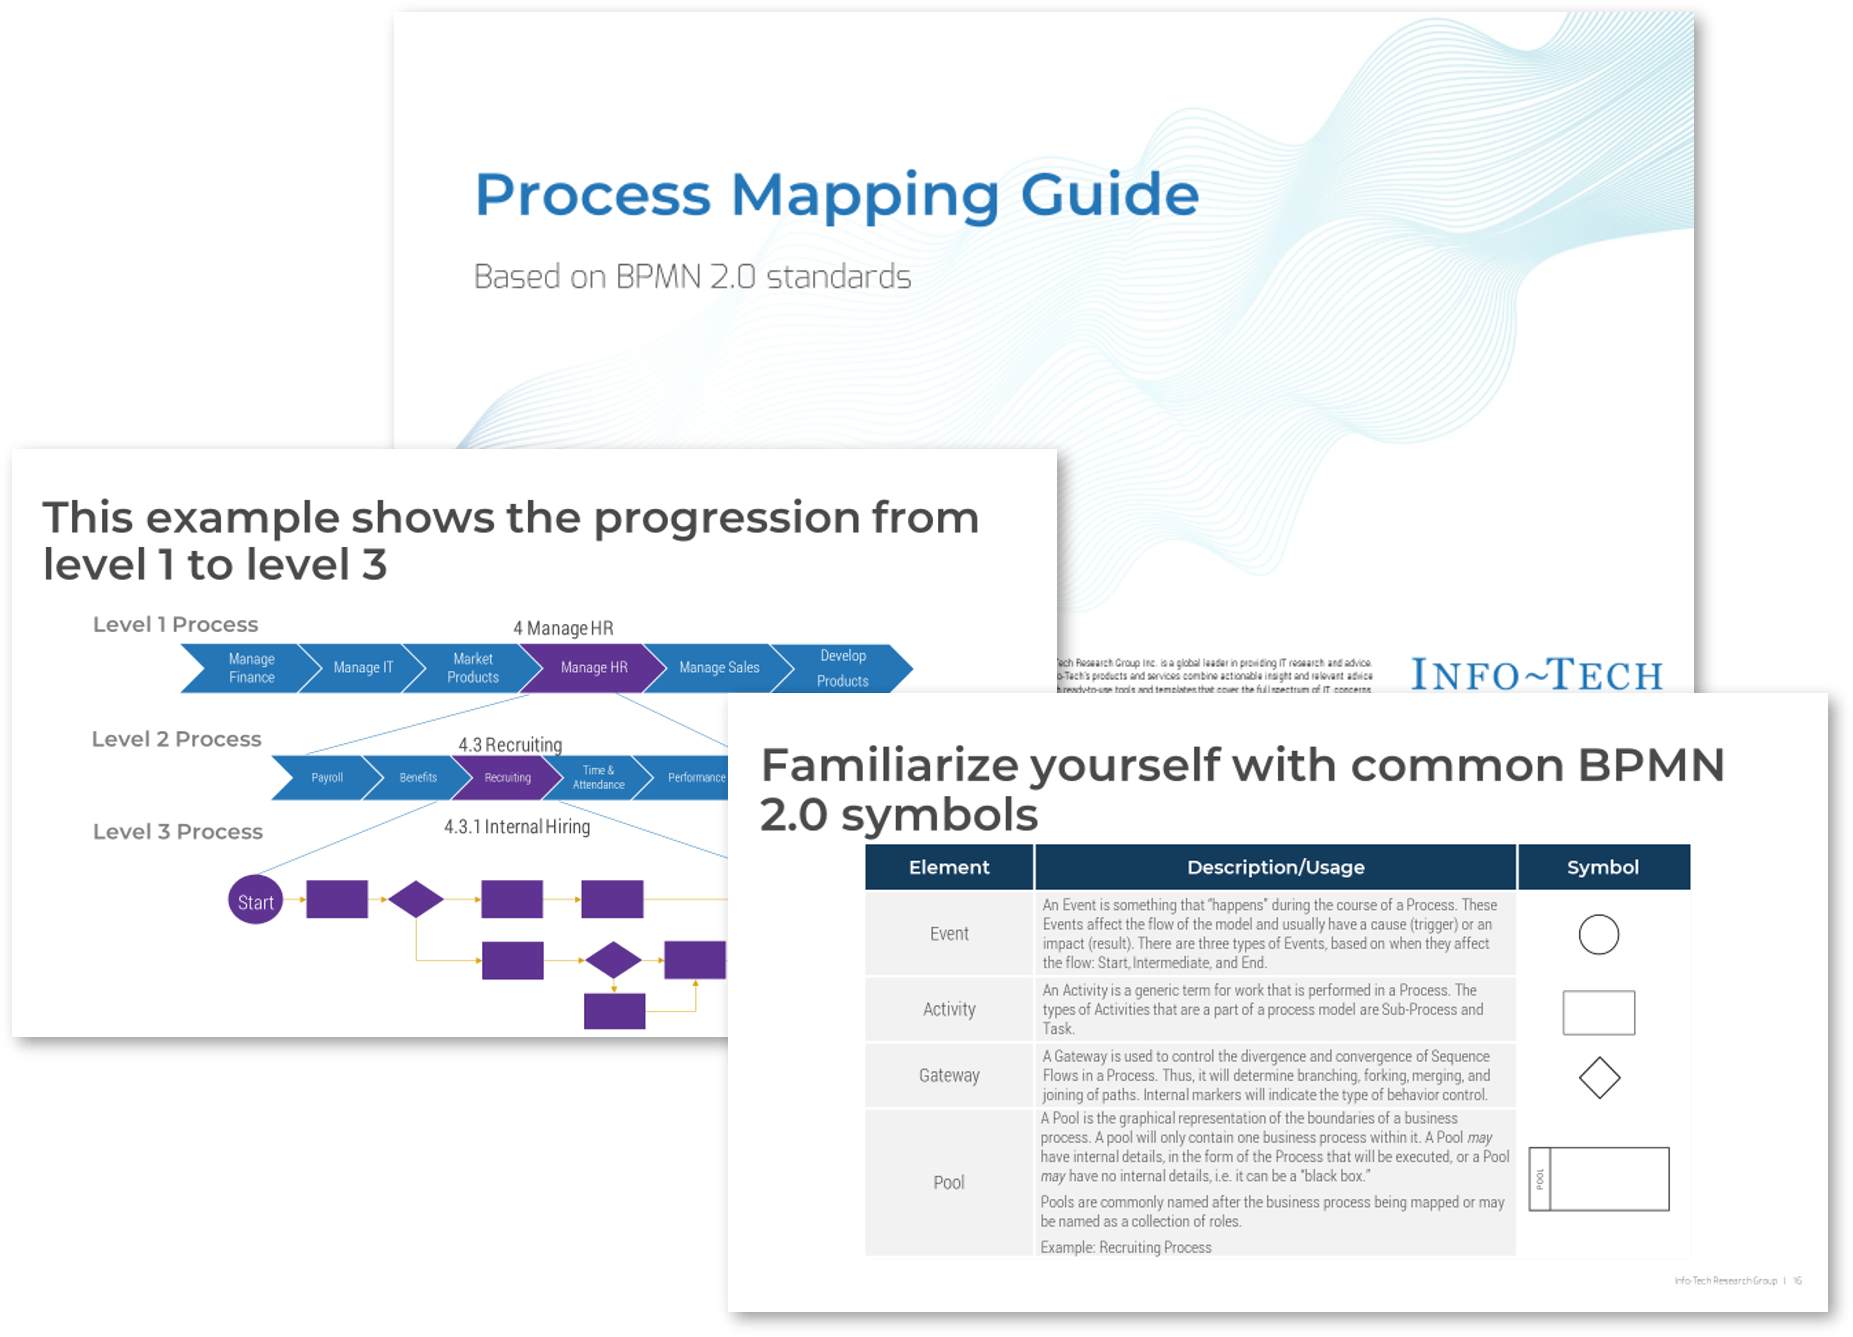 The image contains screenshots of the Process Mapping Guide.